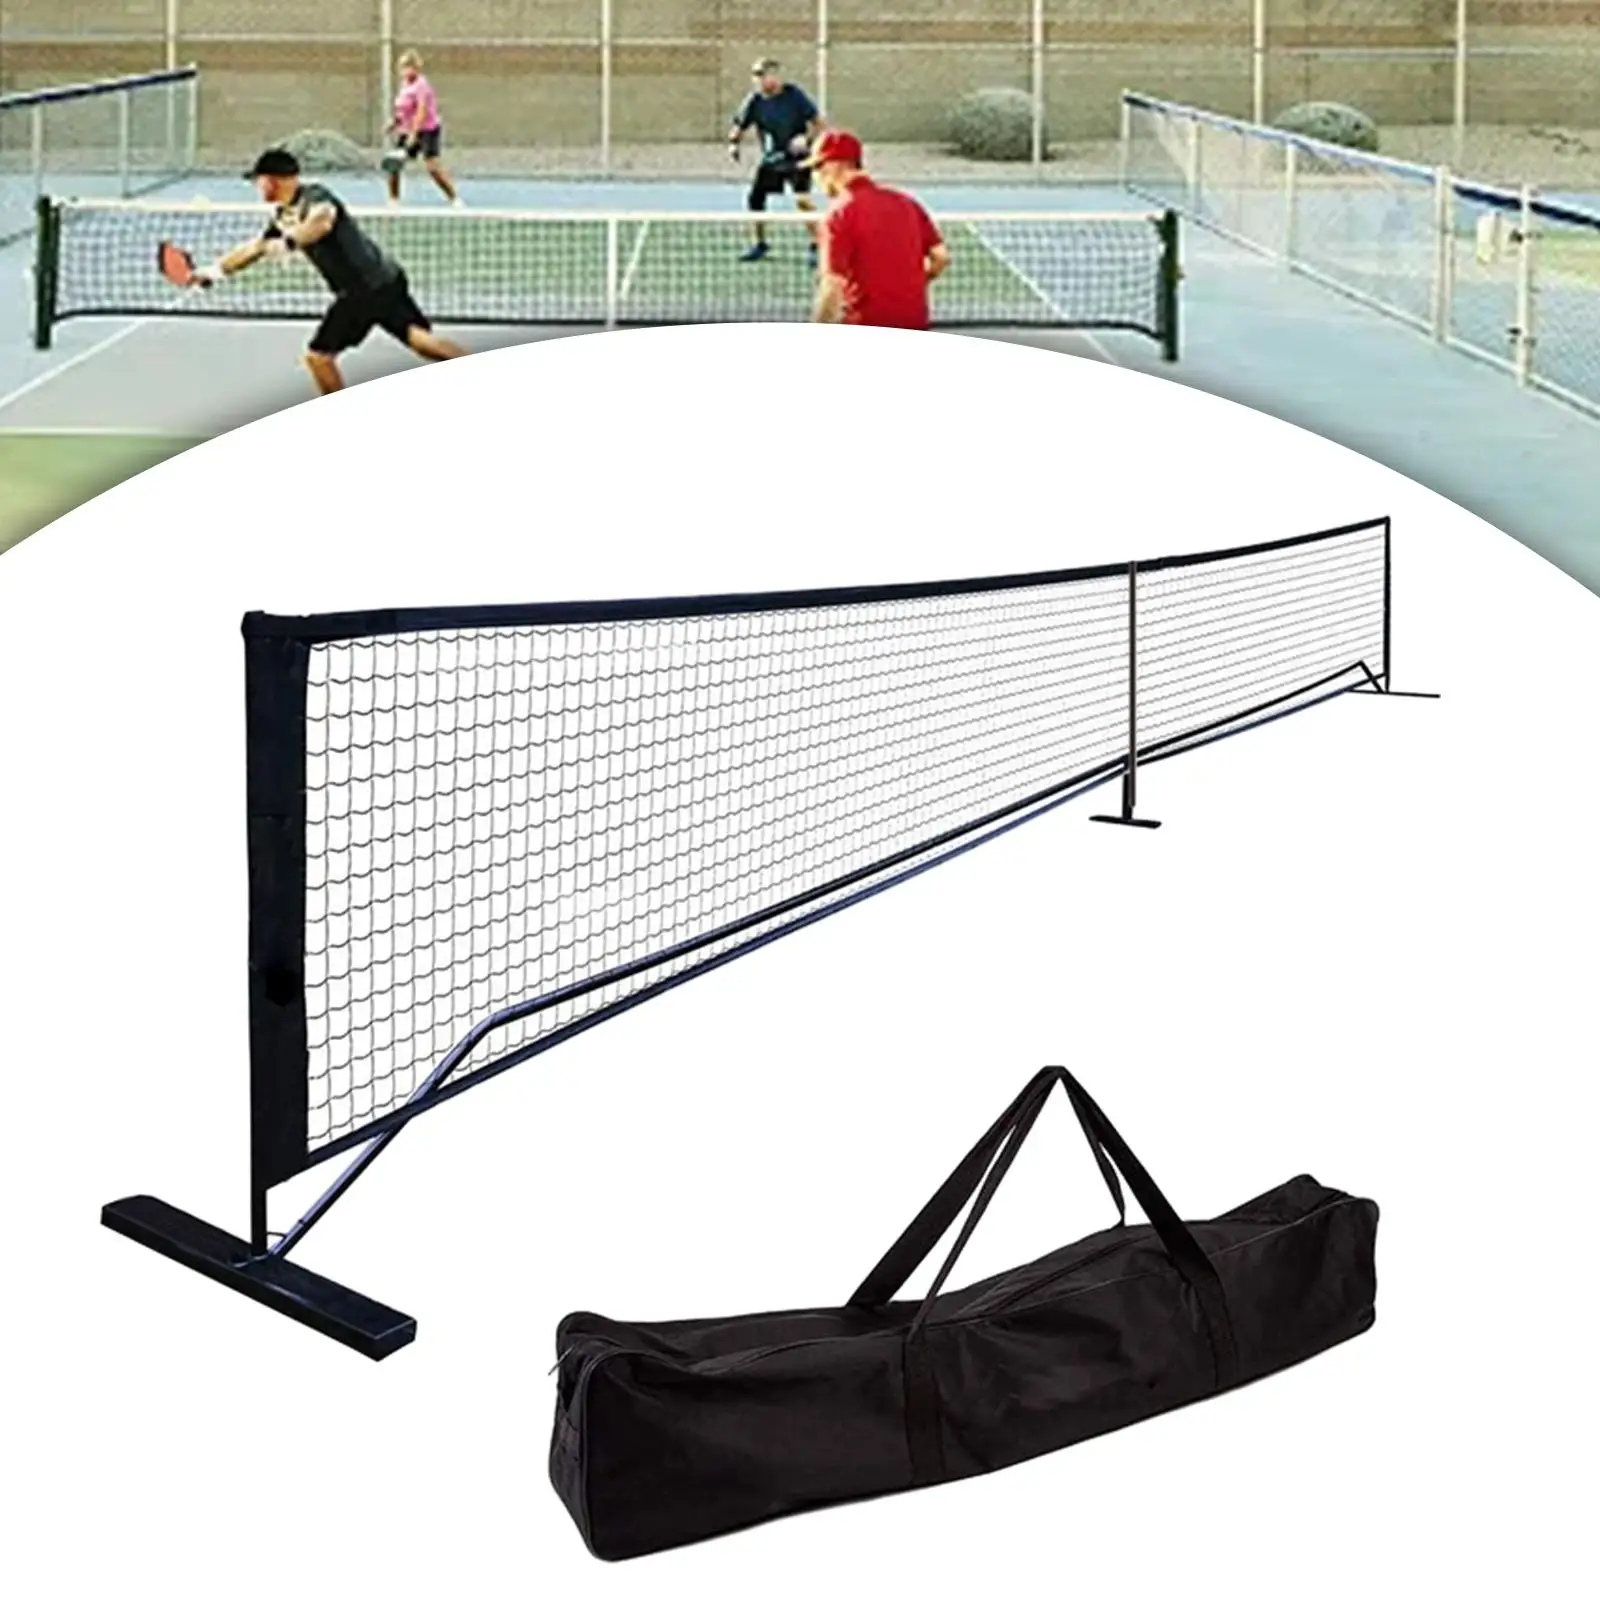 

Portable Pickleball Net Set Driveway Matches Parties Beginners Backyards Training Iron Frame Durable Professionals Easy Setup